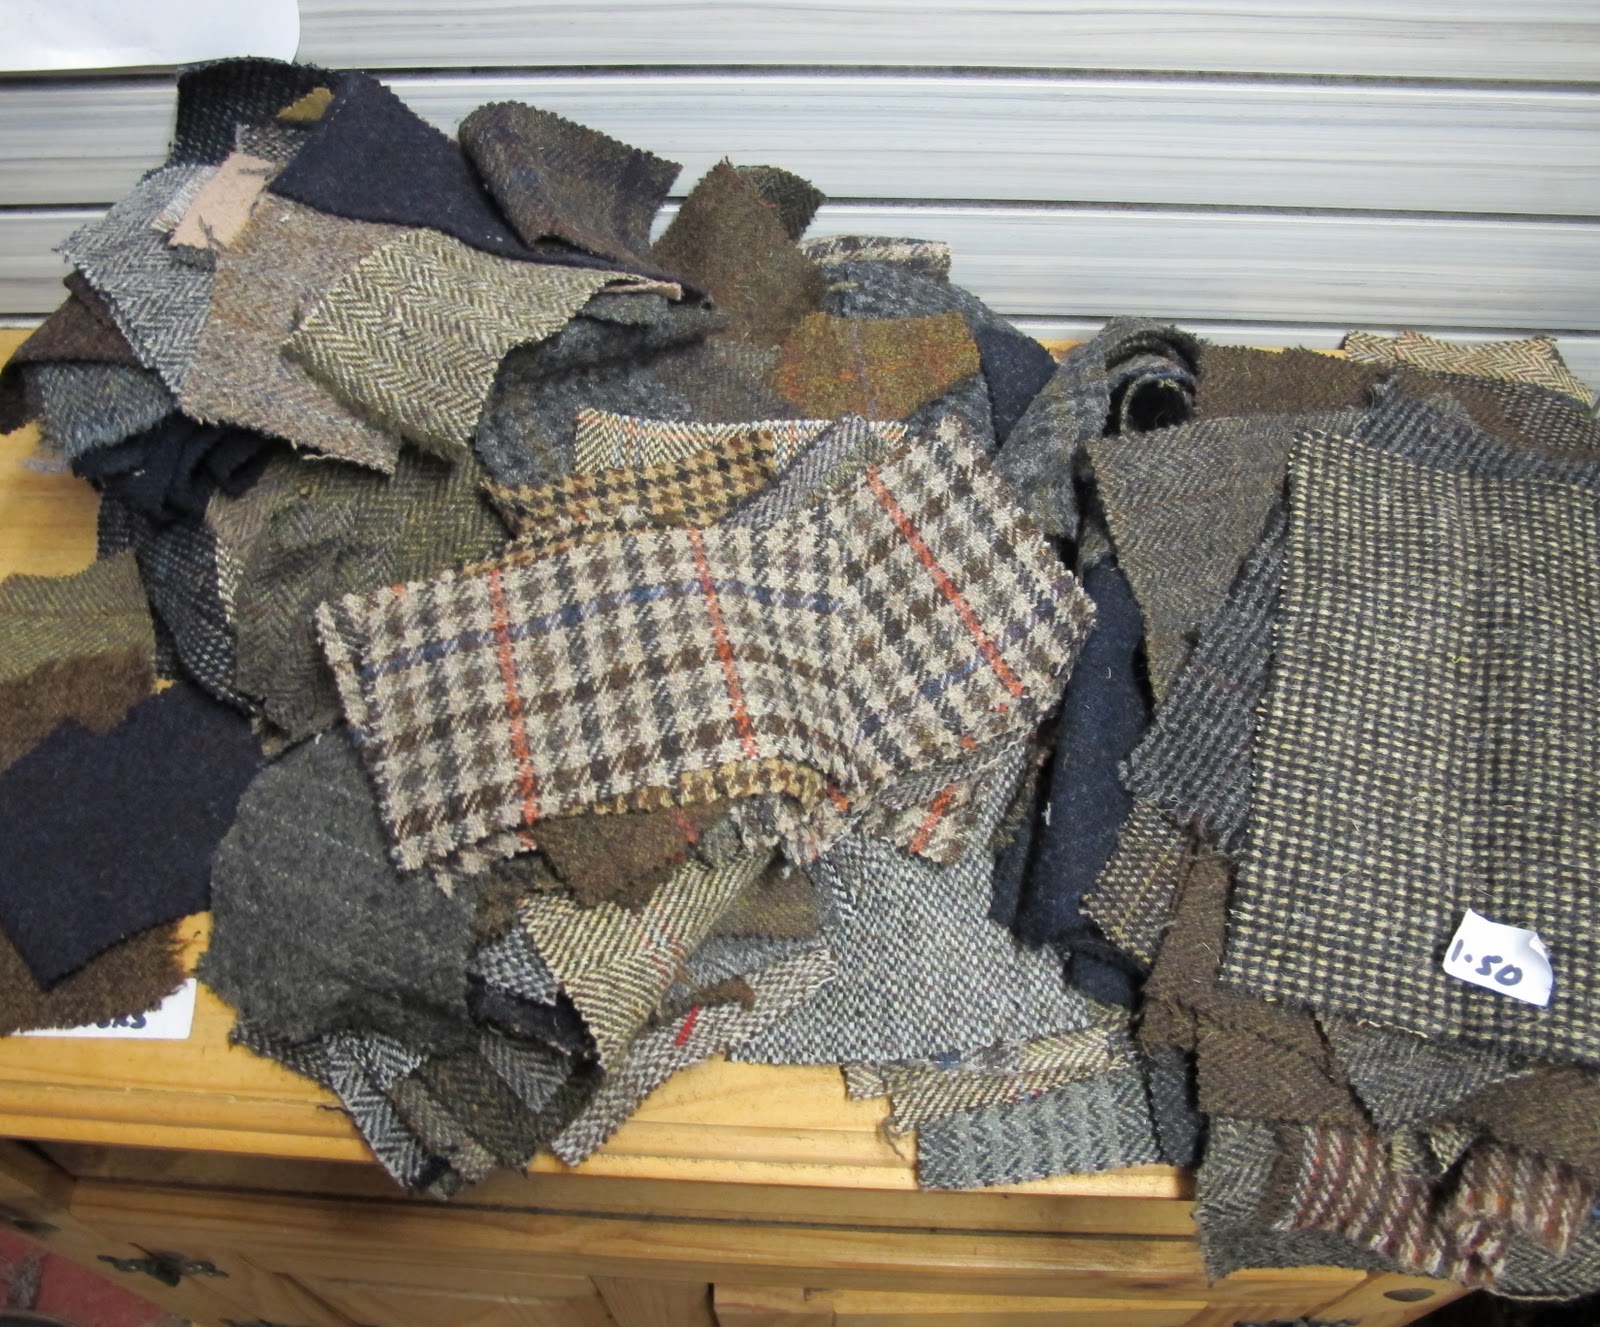 CLAFLIN, THAYER AND CO.: HARRIS TWEED PART 2 - FABRIC